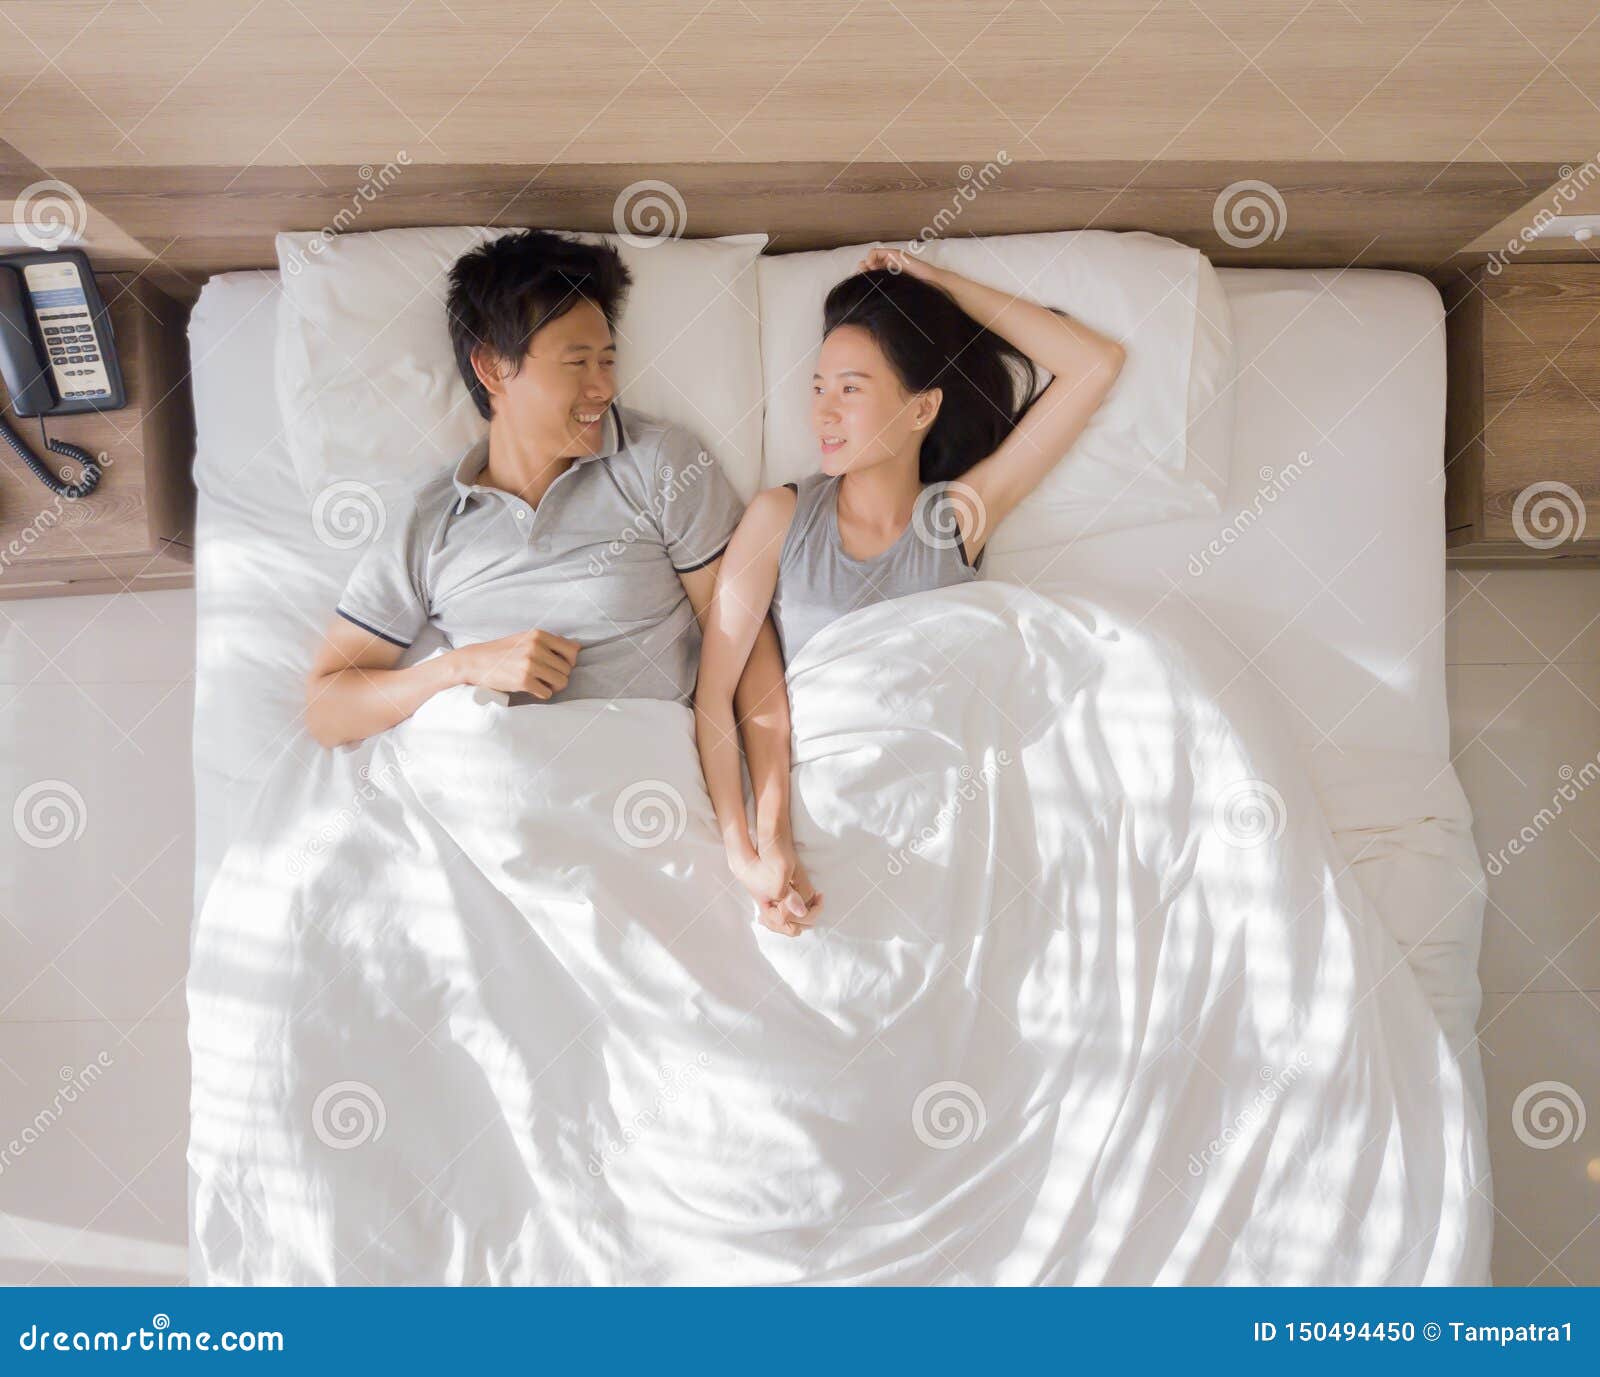 Top View of Happy Asian Couple Smiling, and Sleeping Together on Bed in Love and Sex Concept in a Modern Bedroom with White Stock Photo